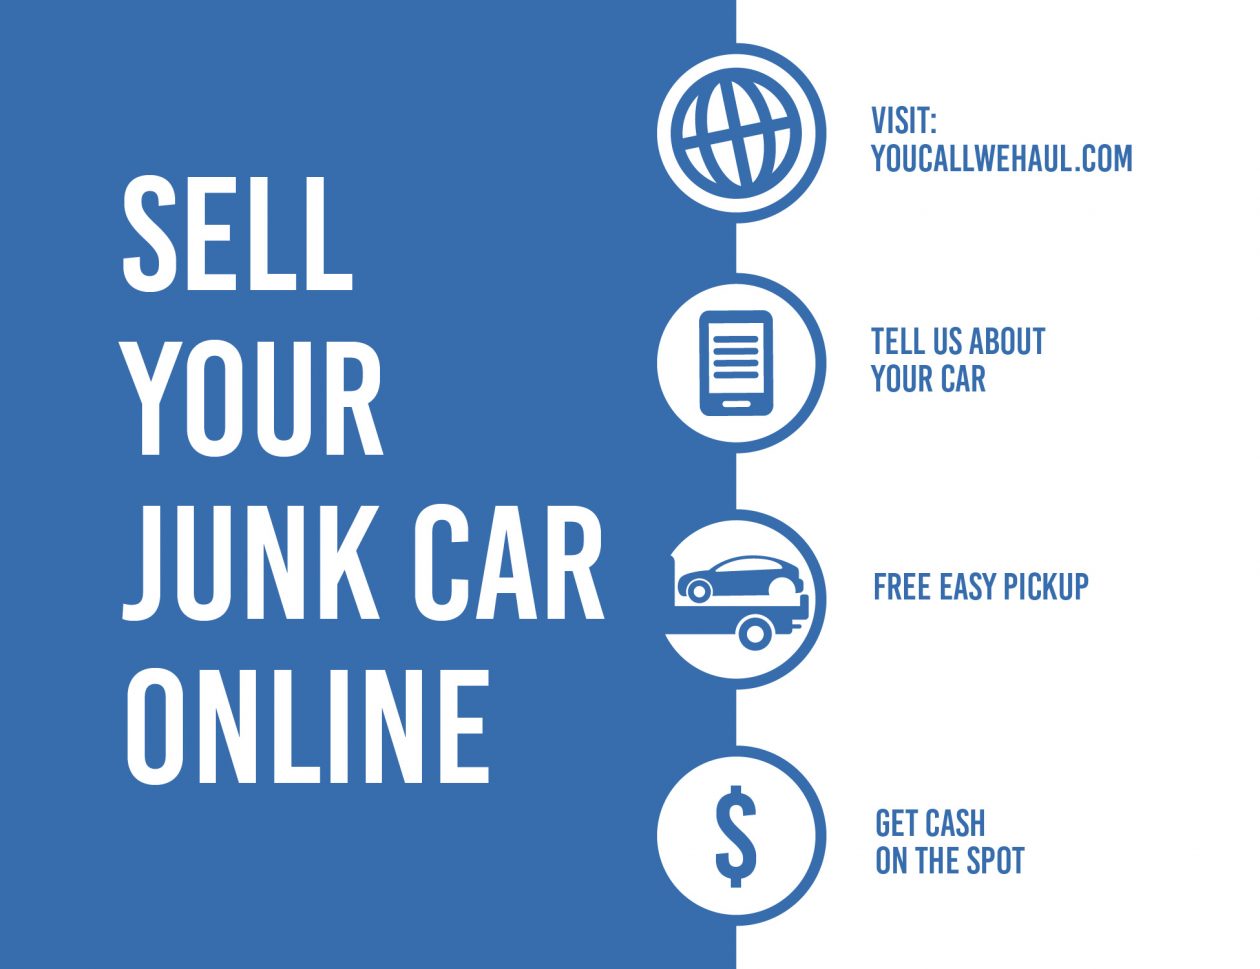 Sell your Junk Car Online